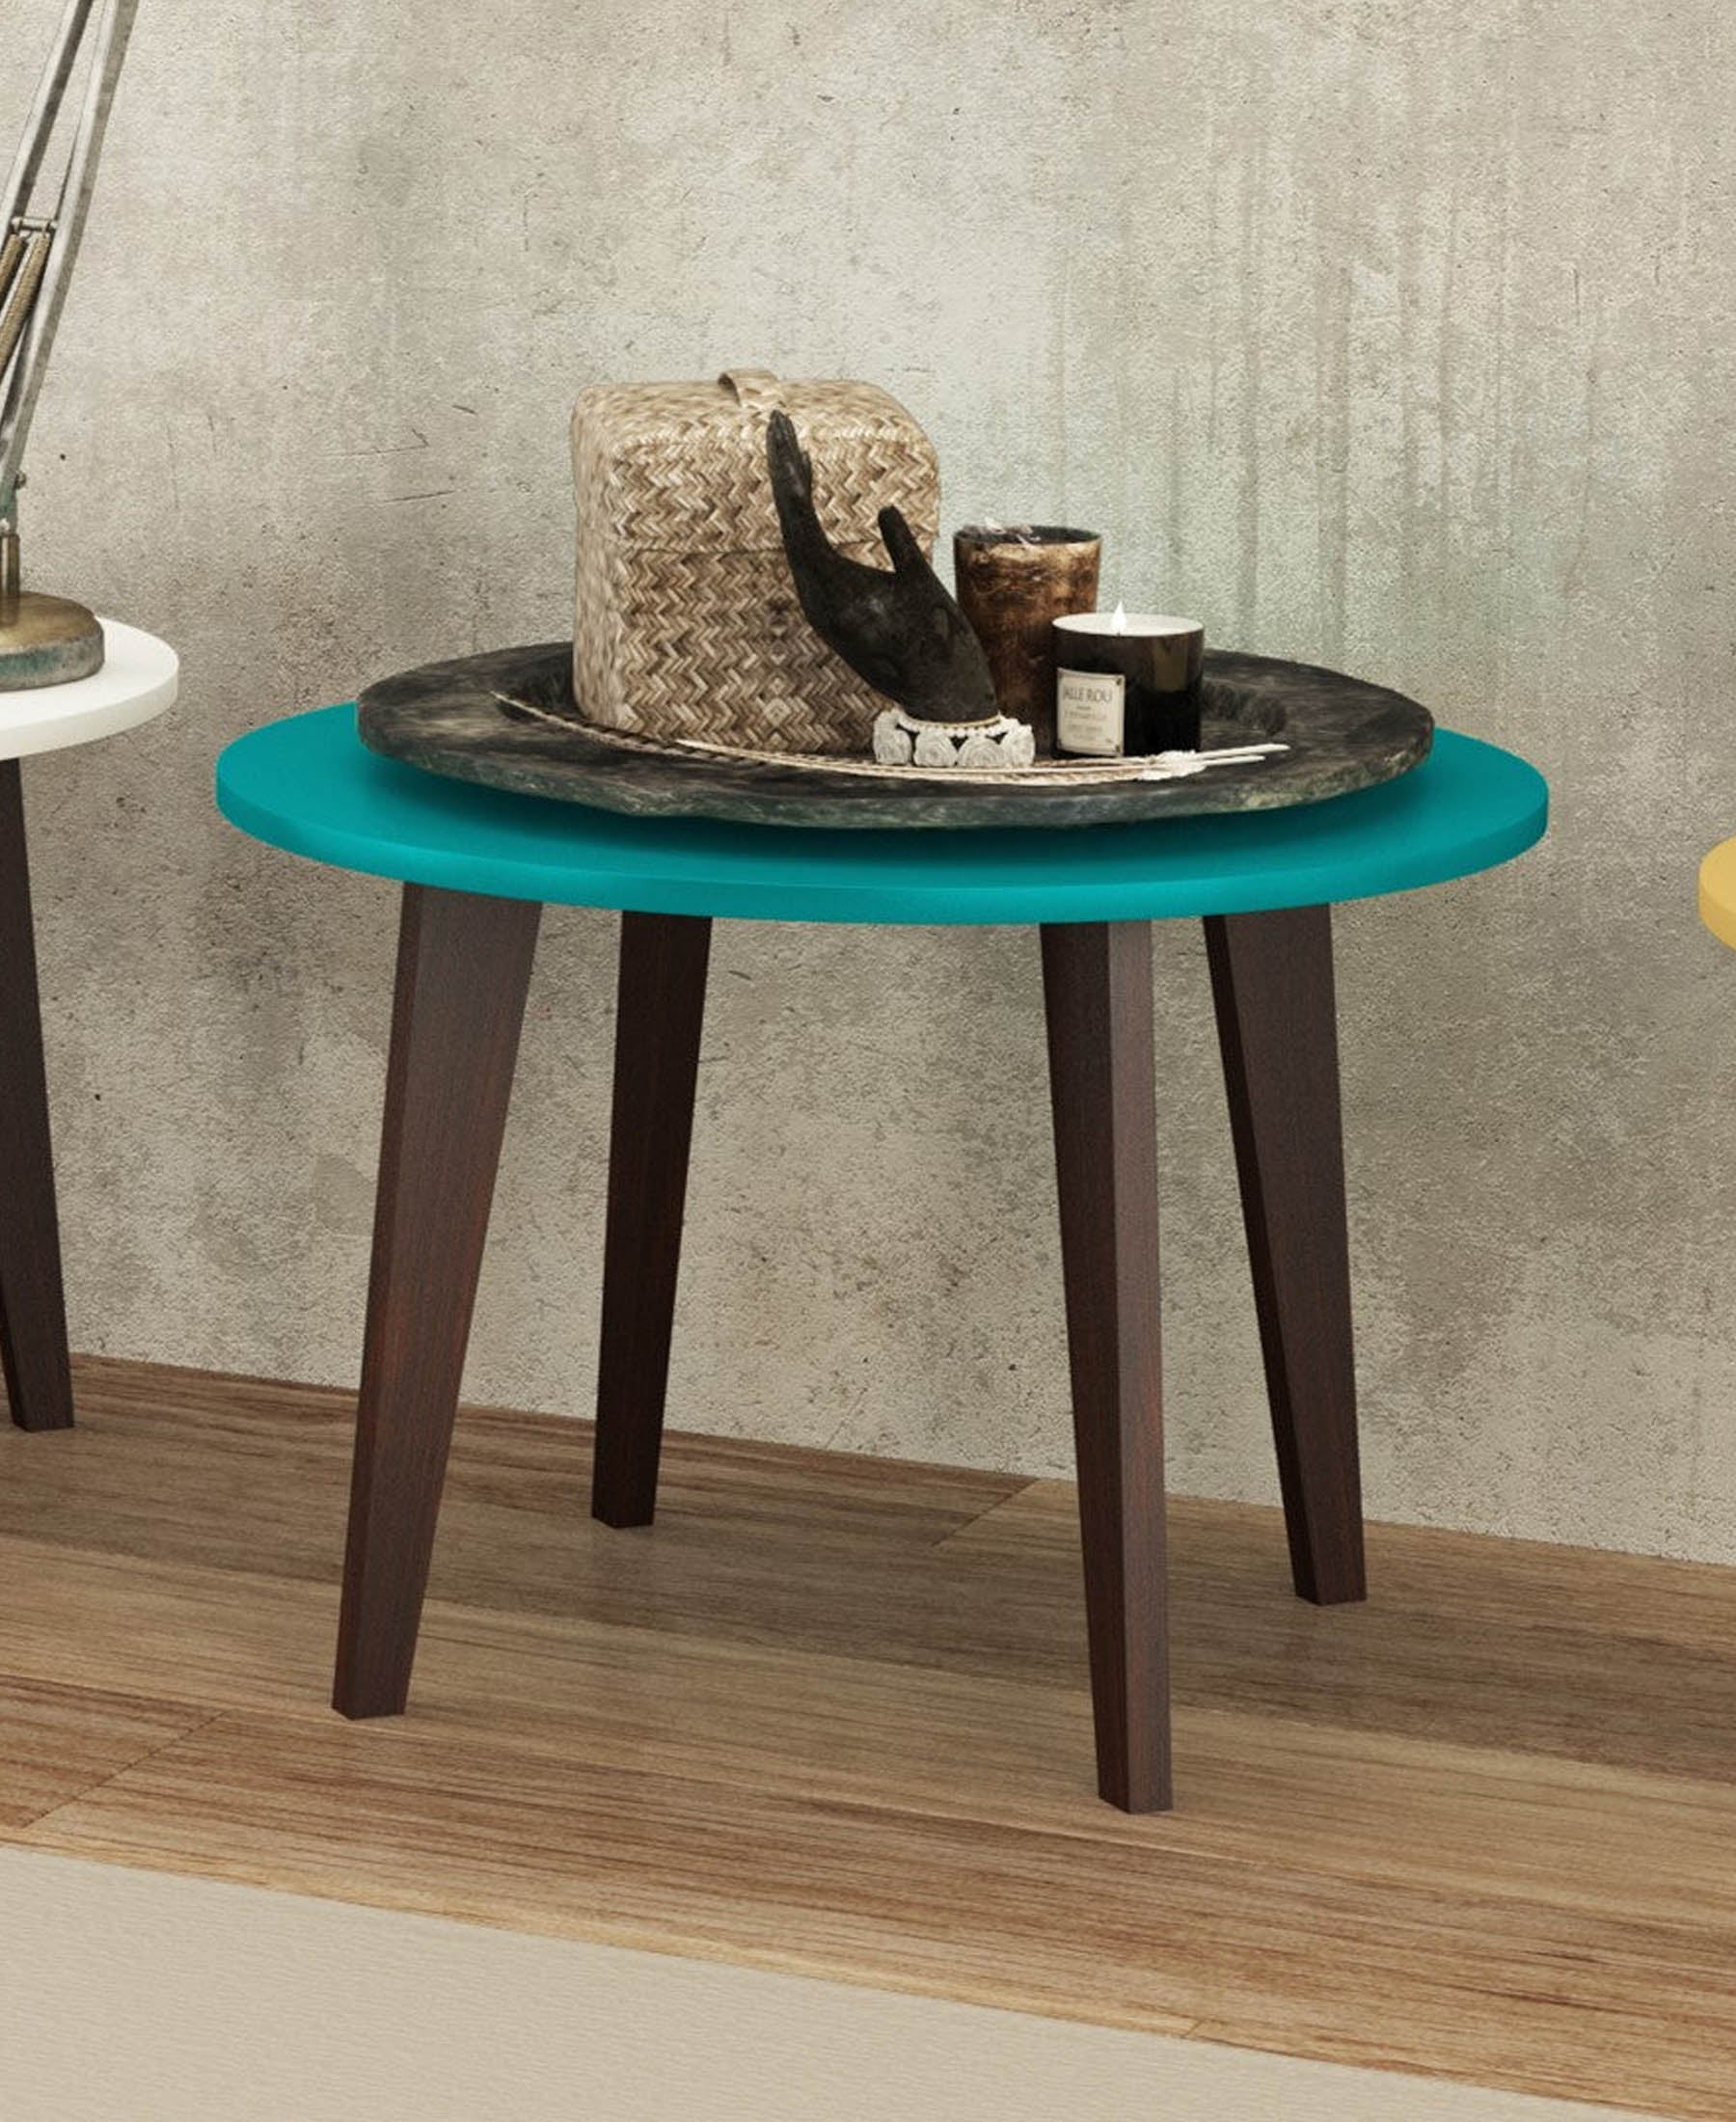 Exotic Designs Coffee Table - Teal